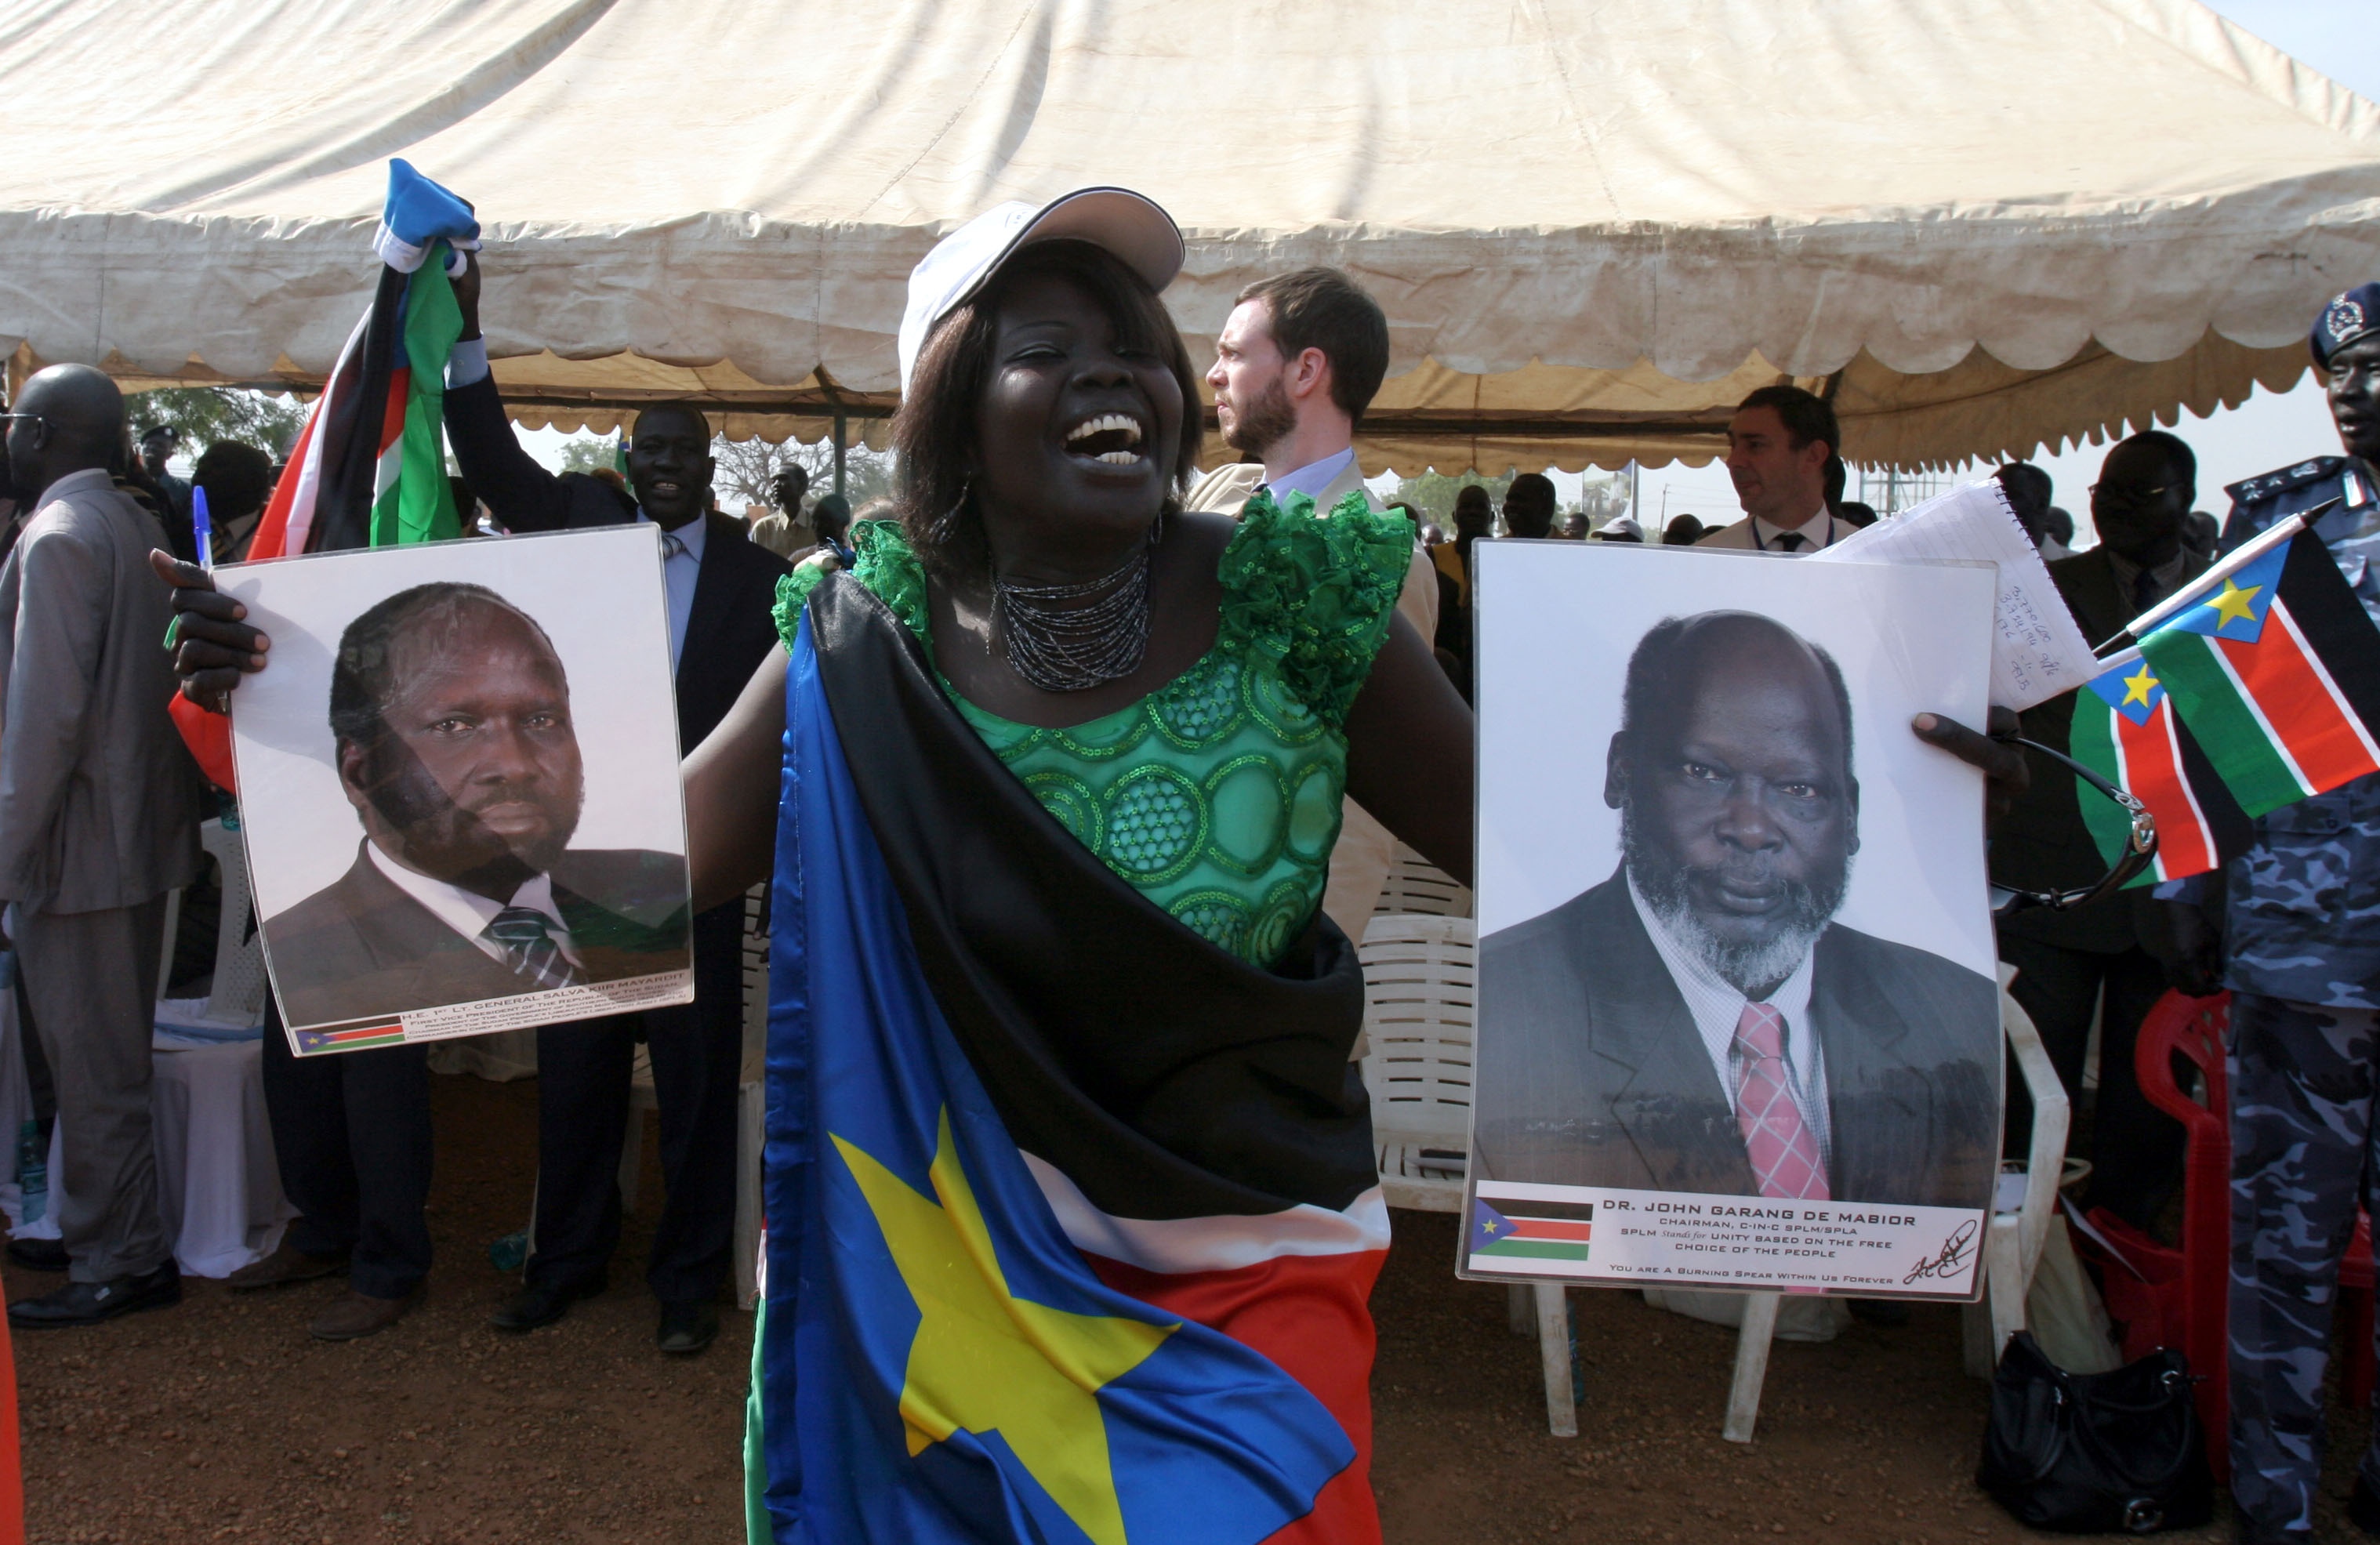 epa02556848 A South Sudanese woman holds pictures of late politican and rebel leader John Garang de Mabior (R) and of First Vice President of Sudan and President of the Government of Southern Sudan Salva Kiir Mayardit (L) celebrates in Juba 30 January 2011 after hearing the preliminary result of the recent independence referendum. Just short of 99 per cent of Southern Sudanese have voted to secede from the north and form an independent state, according to preliminary results released 30 January. EPA/PHILIP DHIL